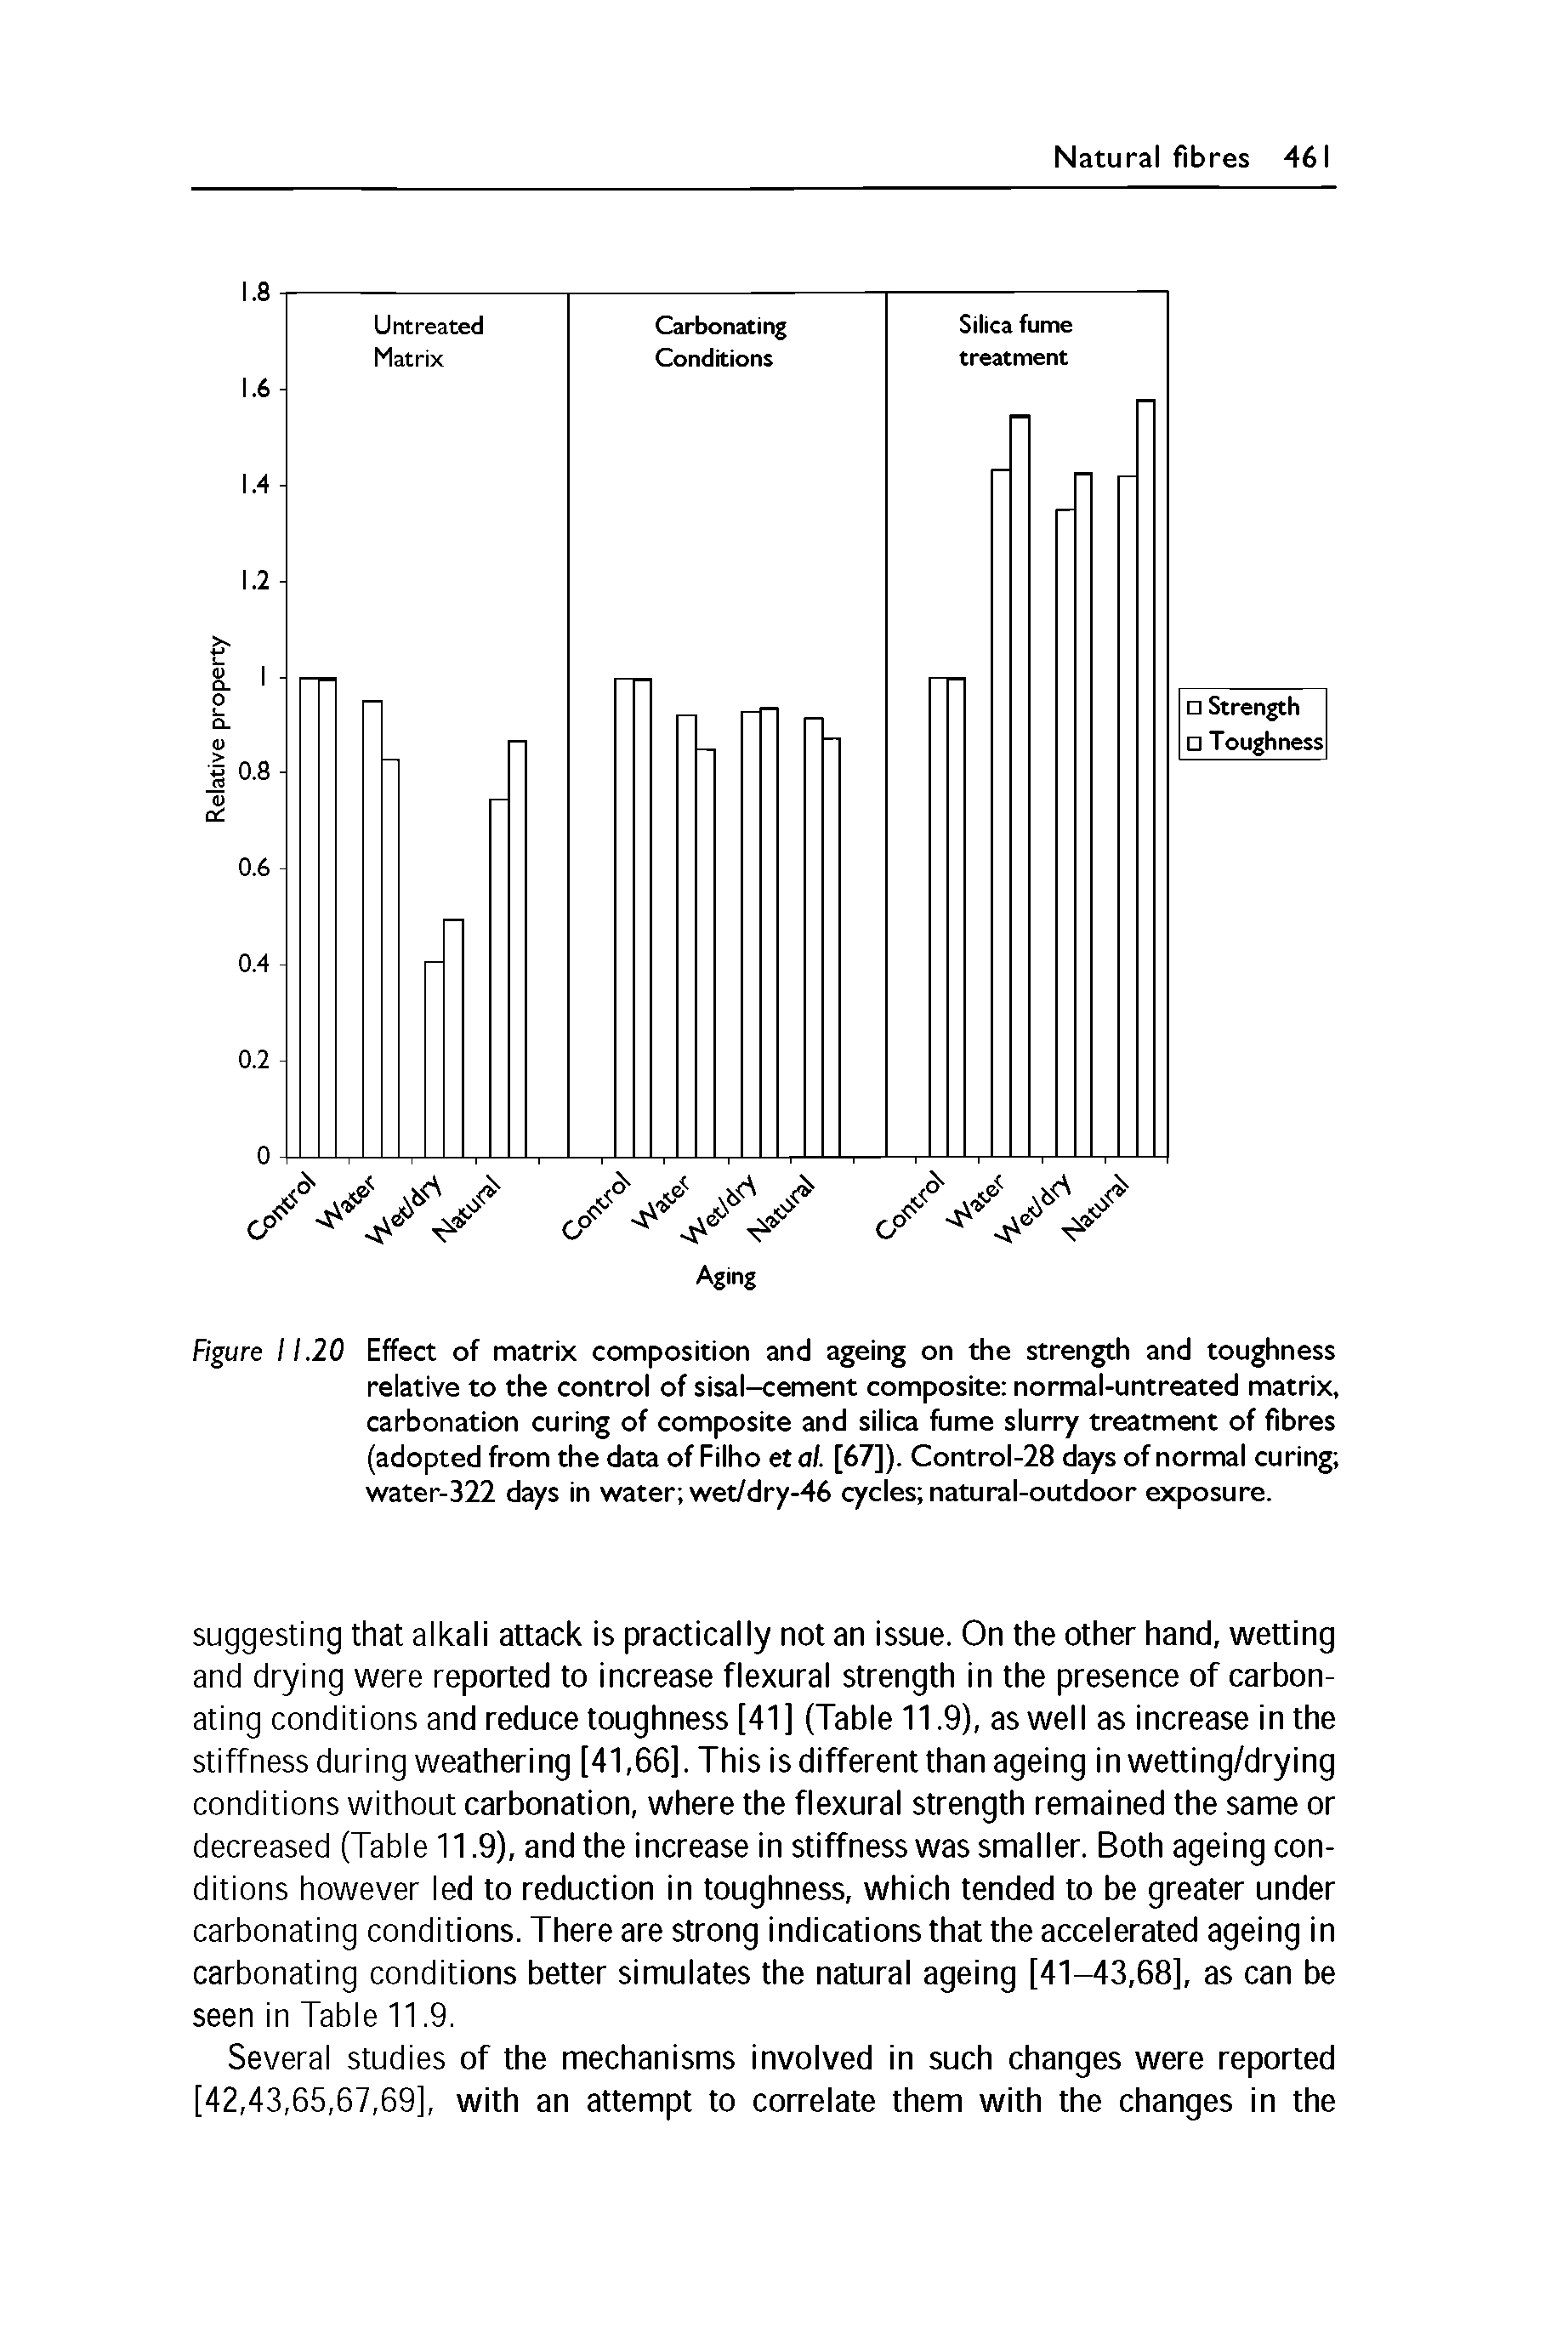 Figure 11.20 Effect of matrix composition and ageing on the strength and toughness relative to the control of sisal-cement composite normal-untreated matrix, carbonation curing of composite and silica fume slurry treatment of fibres (adopted from the data of Filho etal. [67]). Control-28 days of normal curing water-322 days in water wet/dry-46 cycles natural-outdoor exposure.